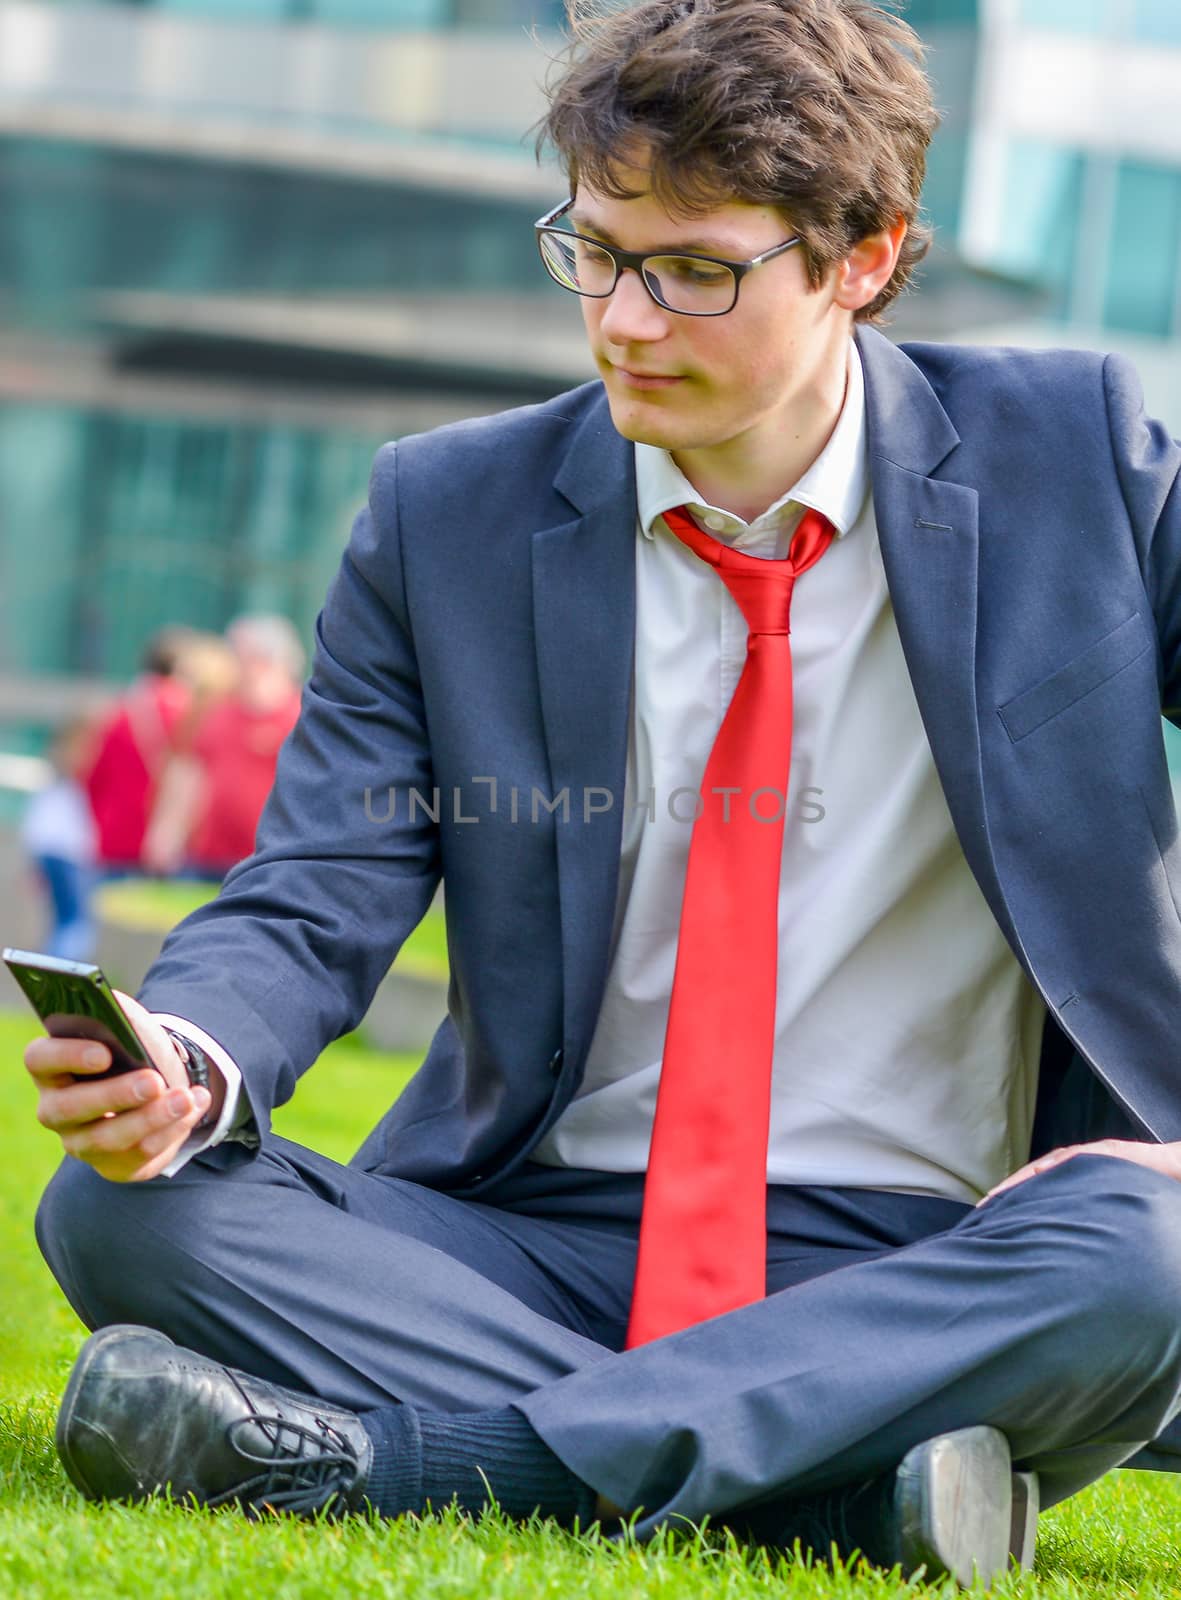 young businessman sitting on the grass, consulting his phone during a break